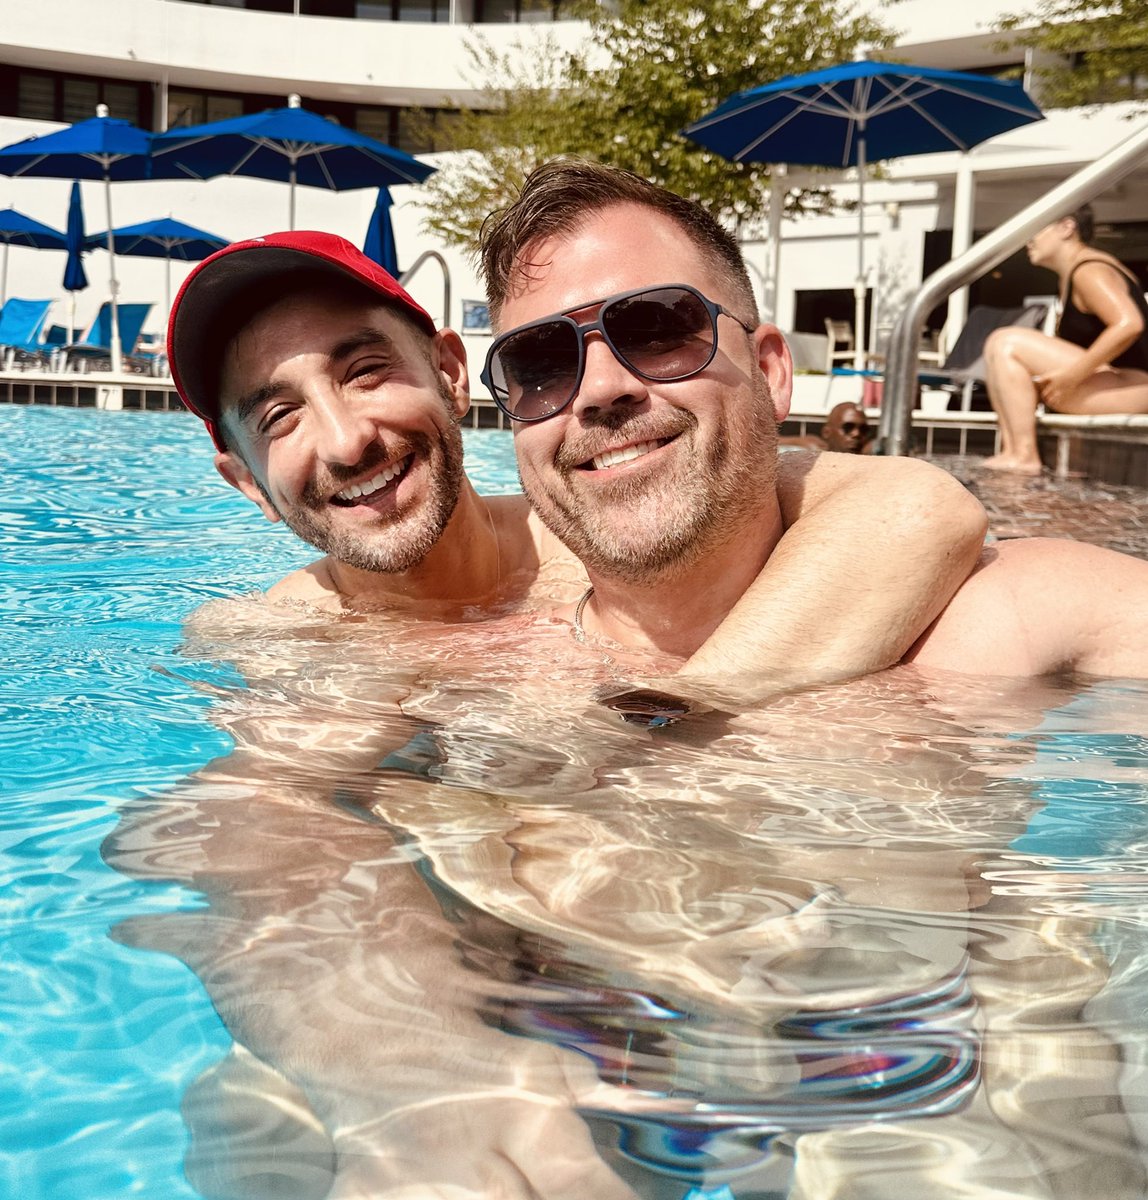 Love this guy so much! 

17.5 years together and still counting!

#gayhusbands #poolday